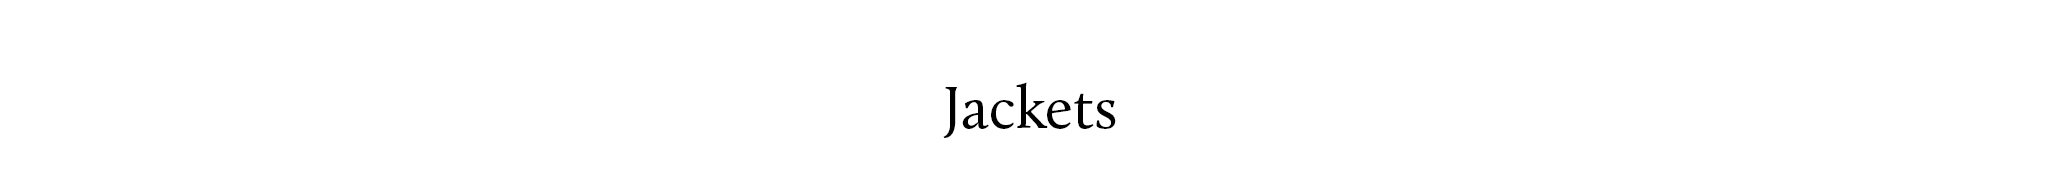 row02_jackets.png